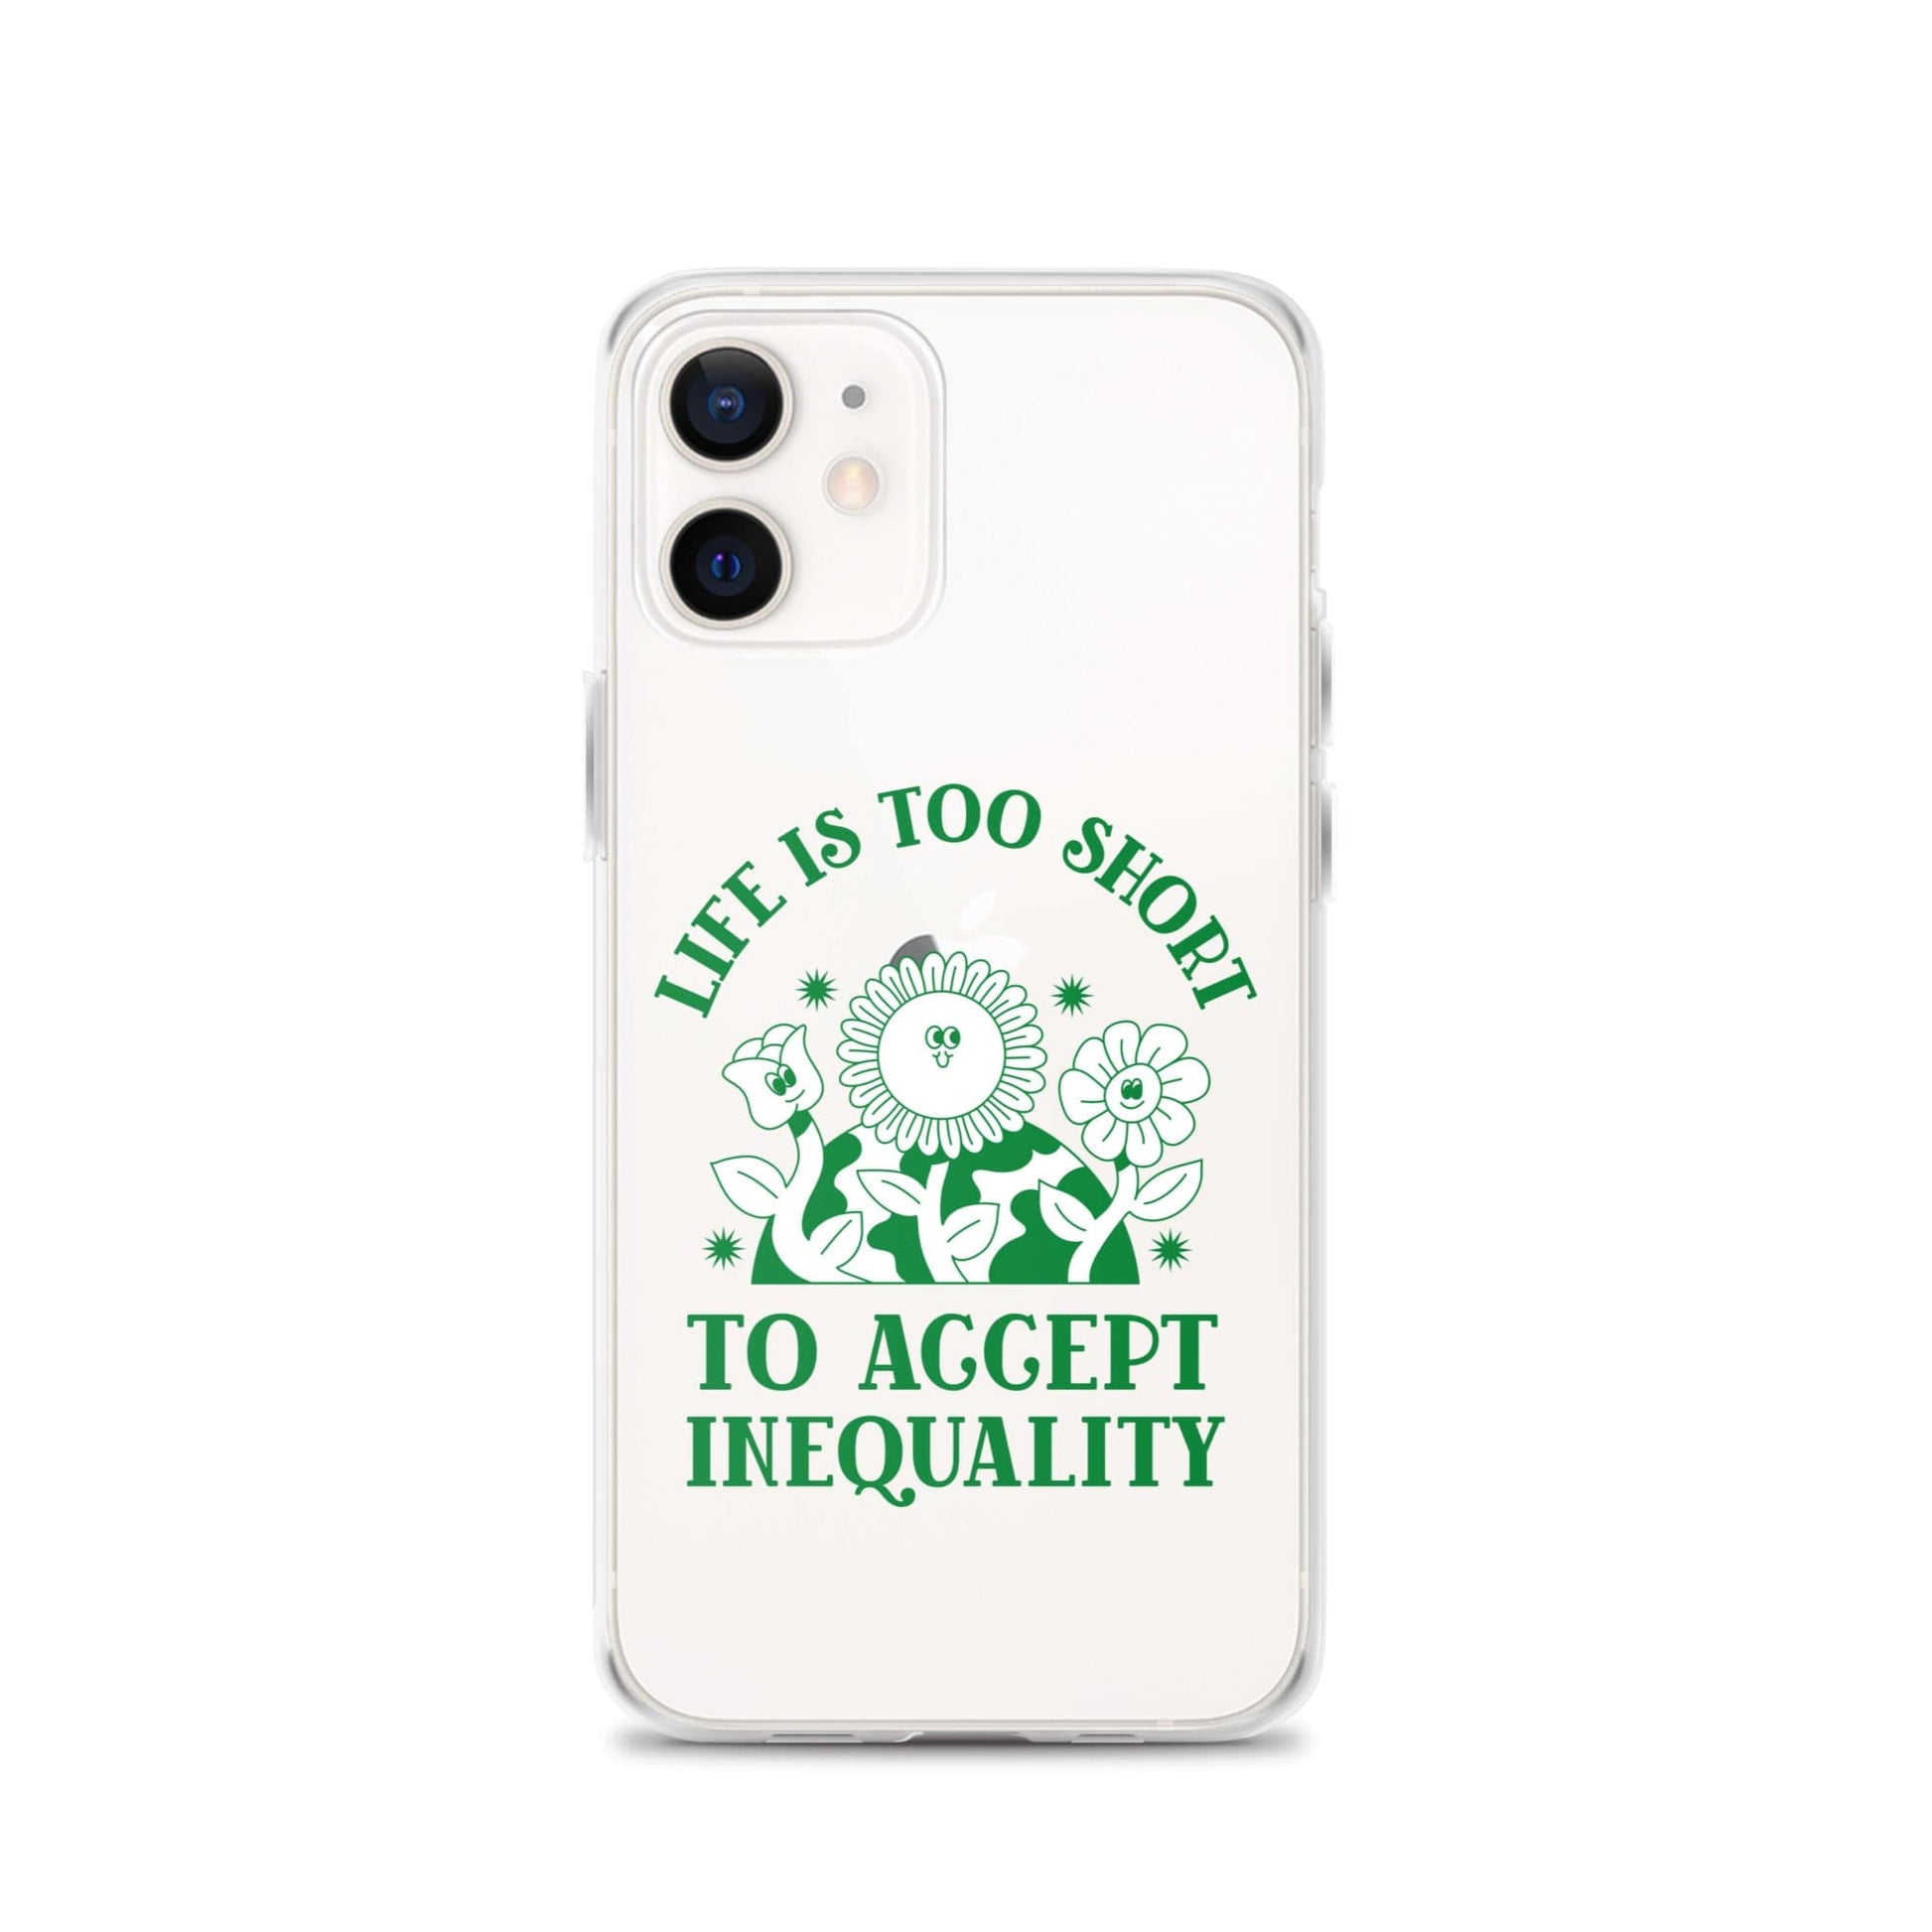 mobile-case-feminist-clear-case-for-iphone